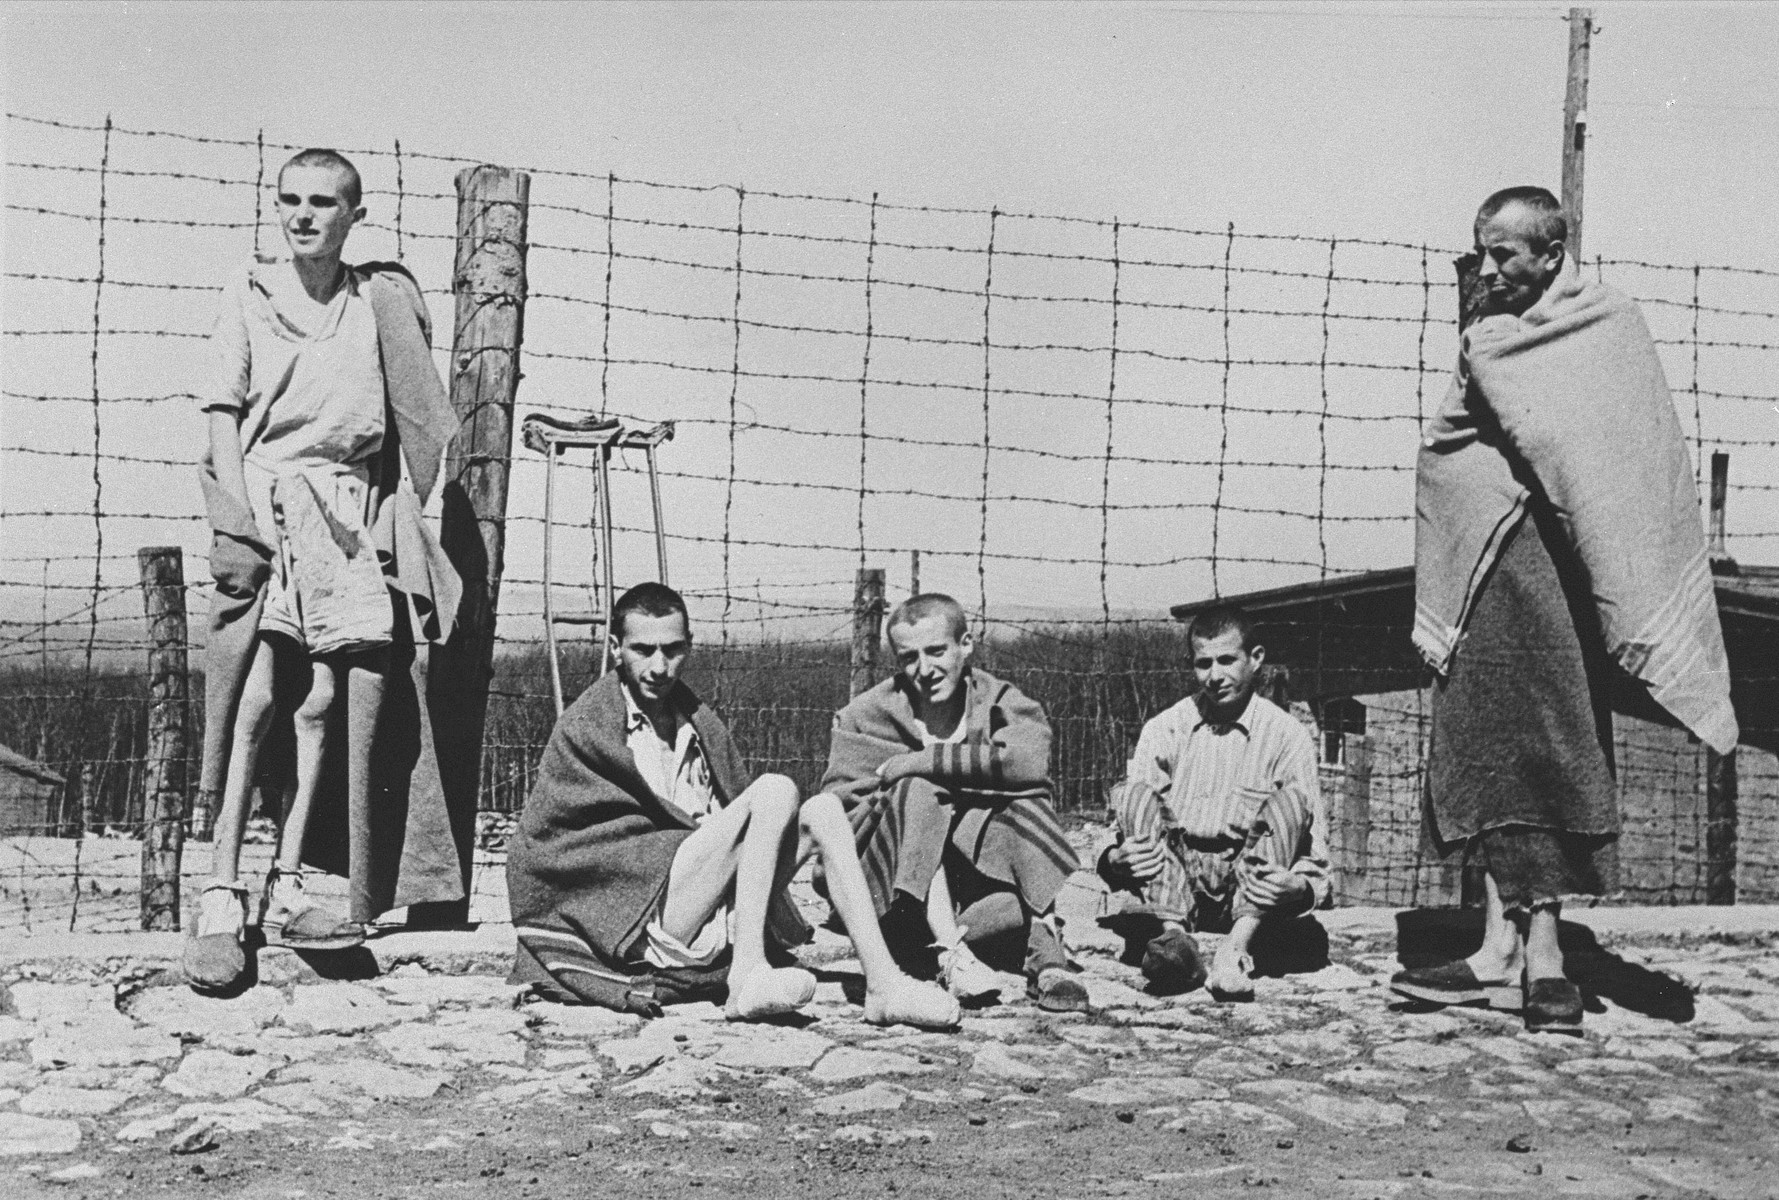 A group of young survivors in Buchenwald.